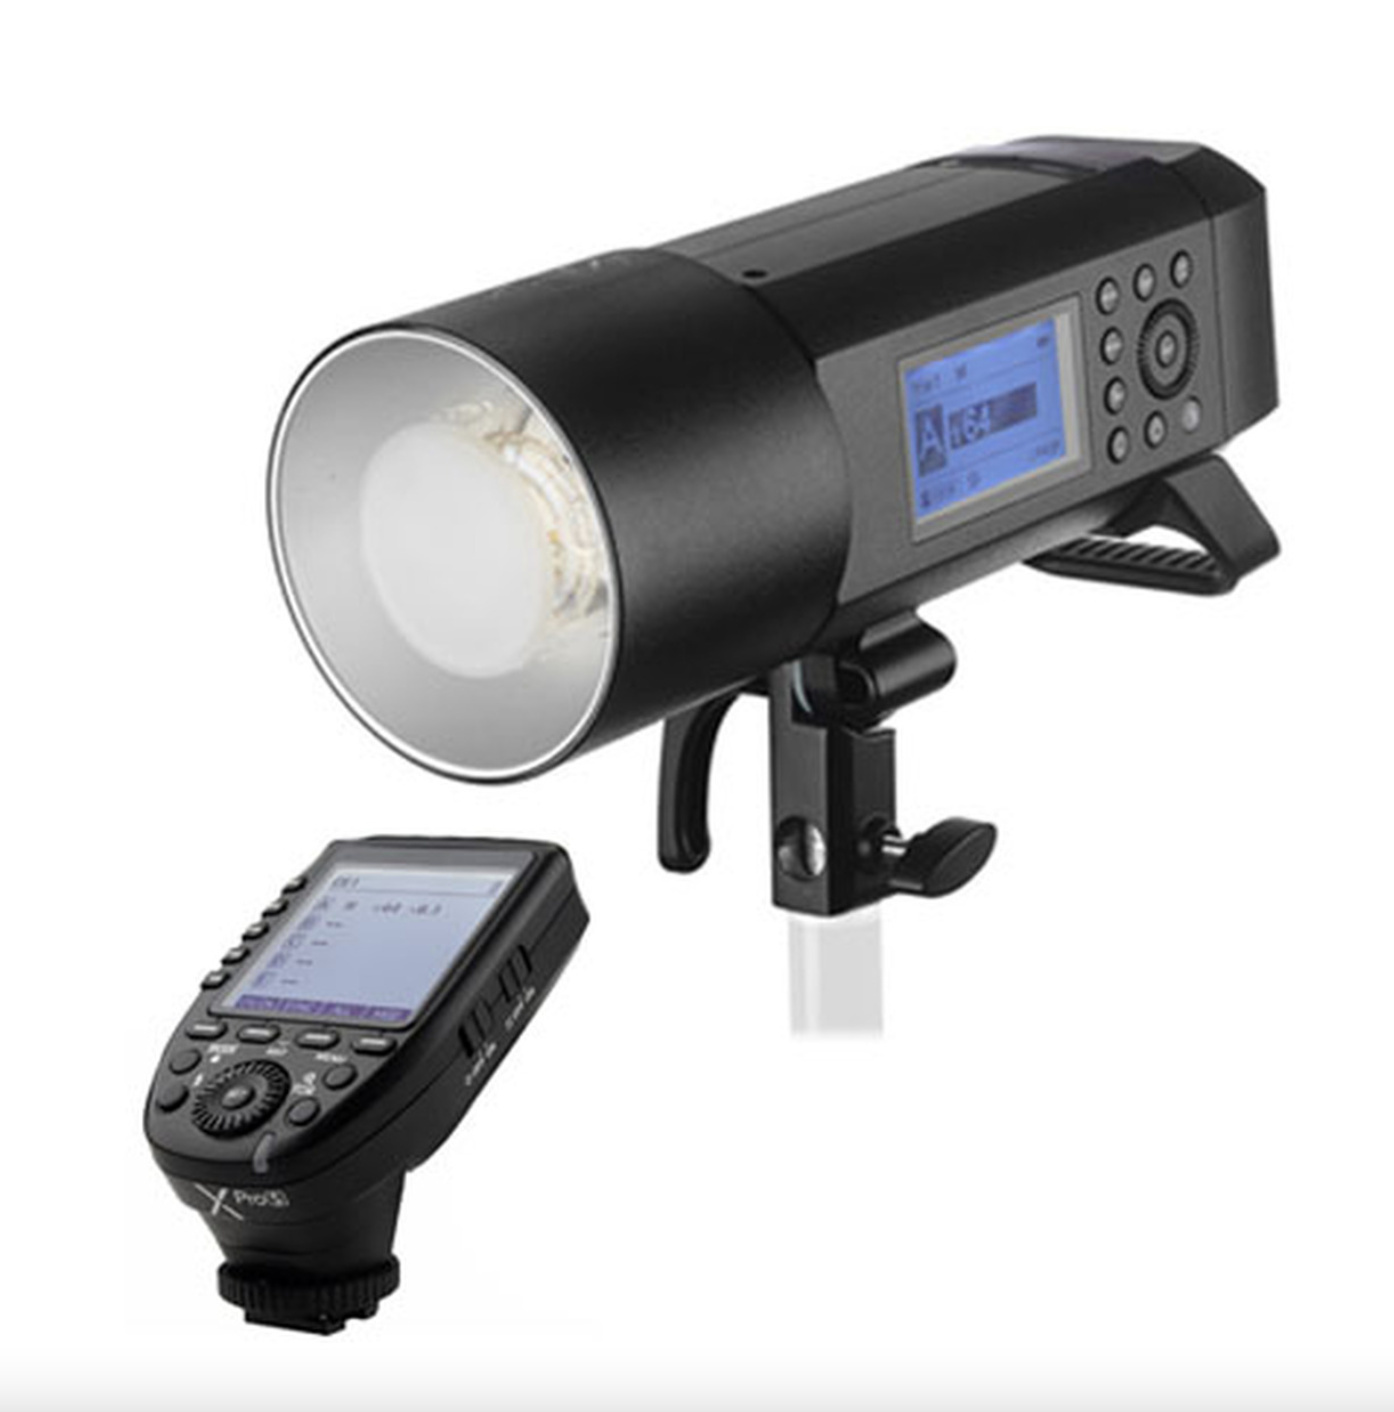 Godox AD400 Pro All-In-One Outdoor Flash + XPRO-C Trigger Kit